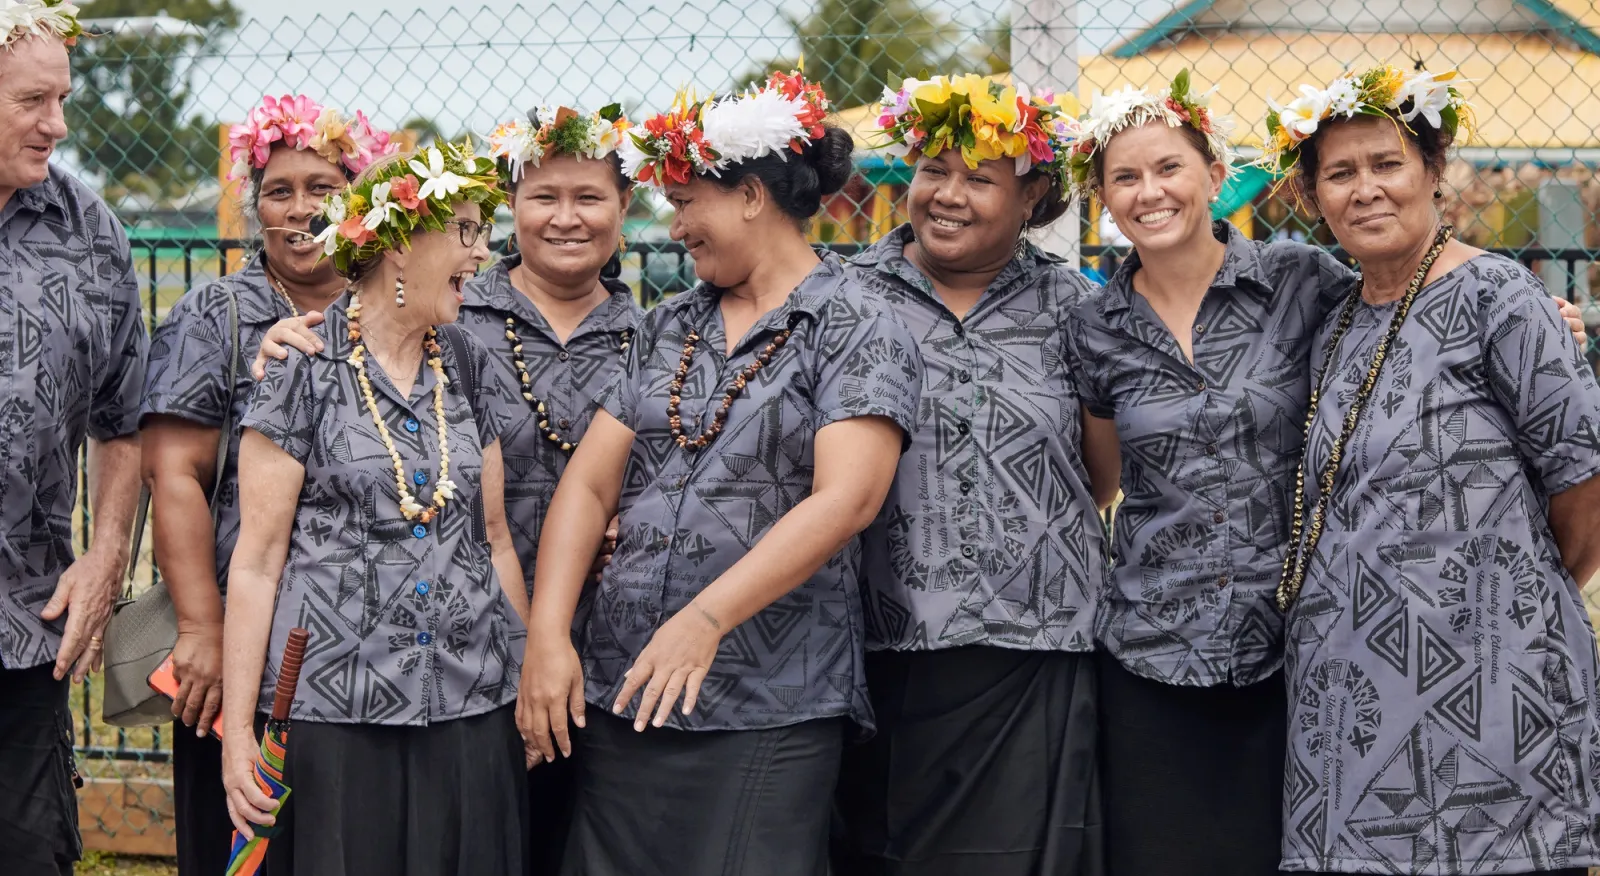 A group of people in traditional attire and flower headwear posing for a photo.